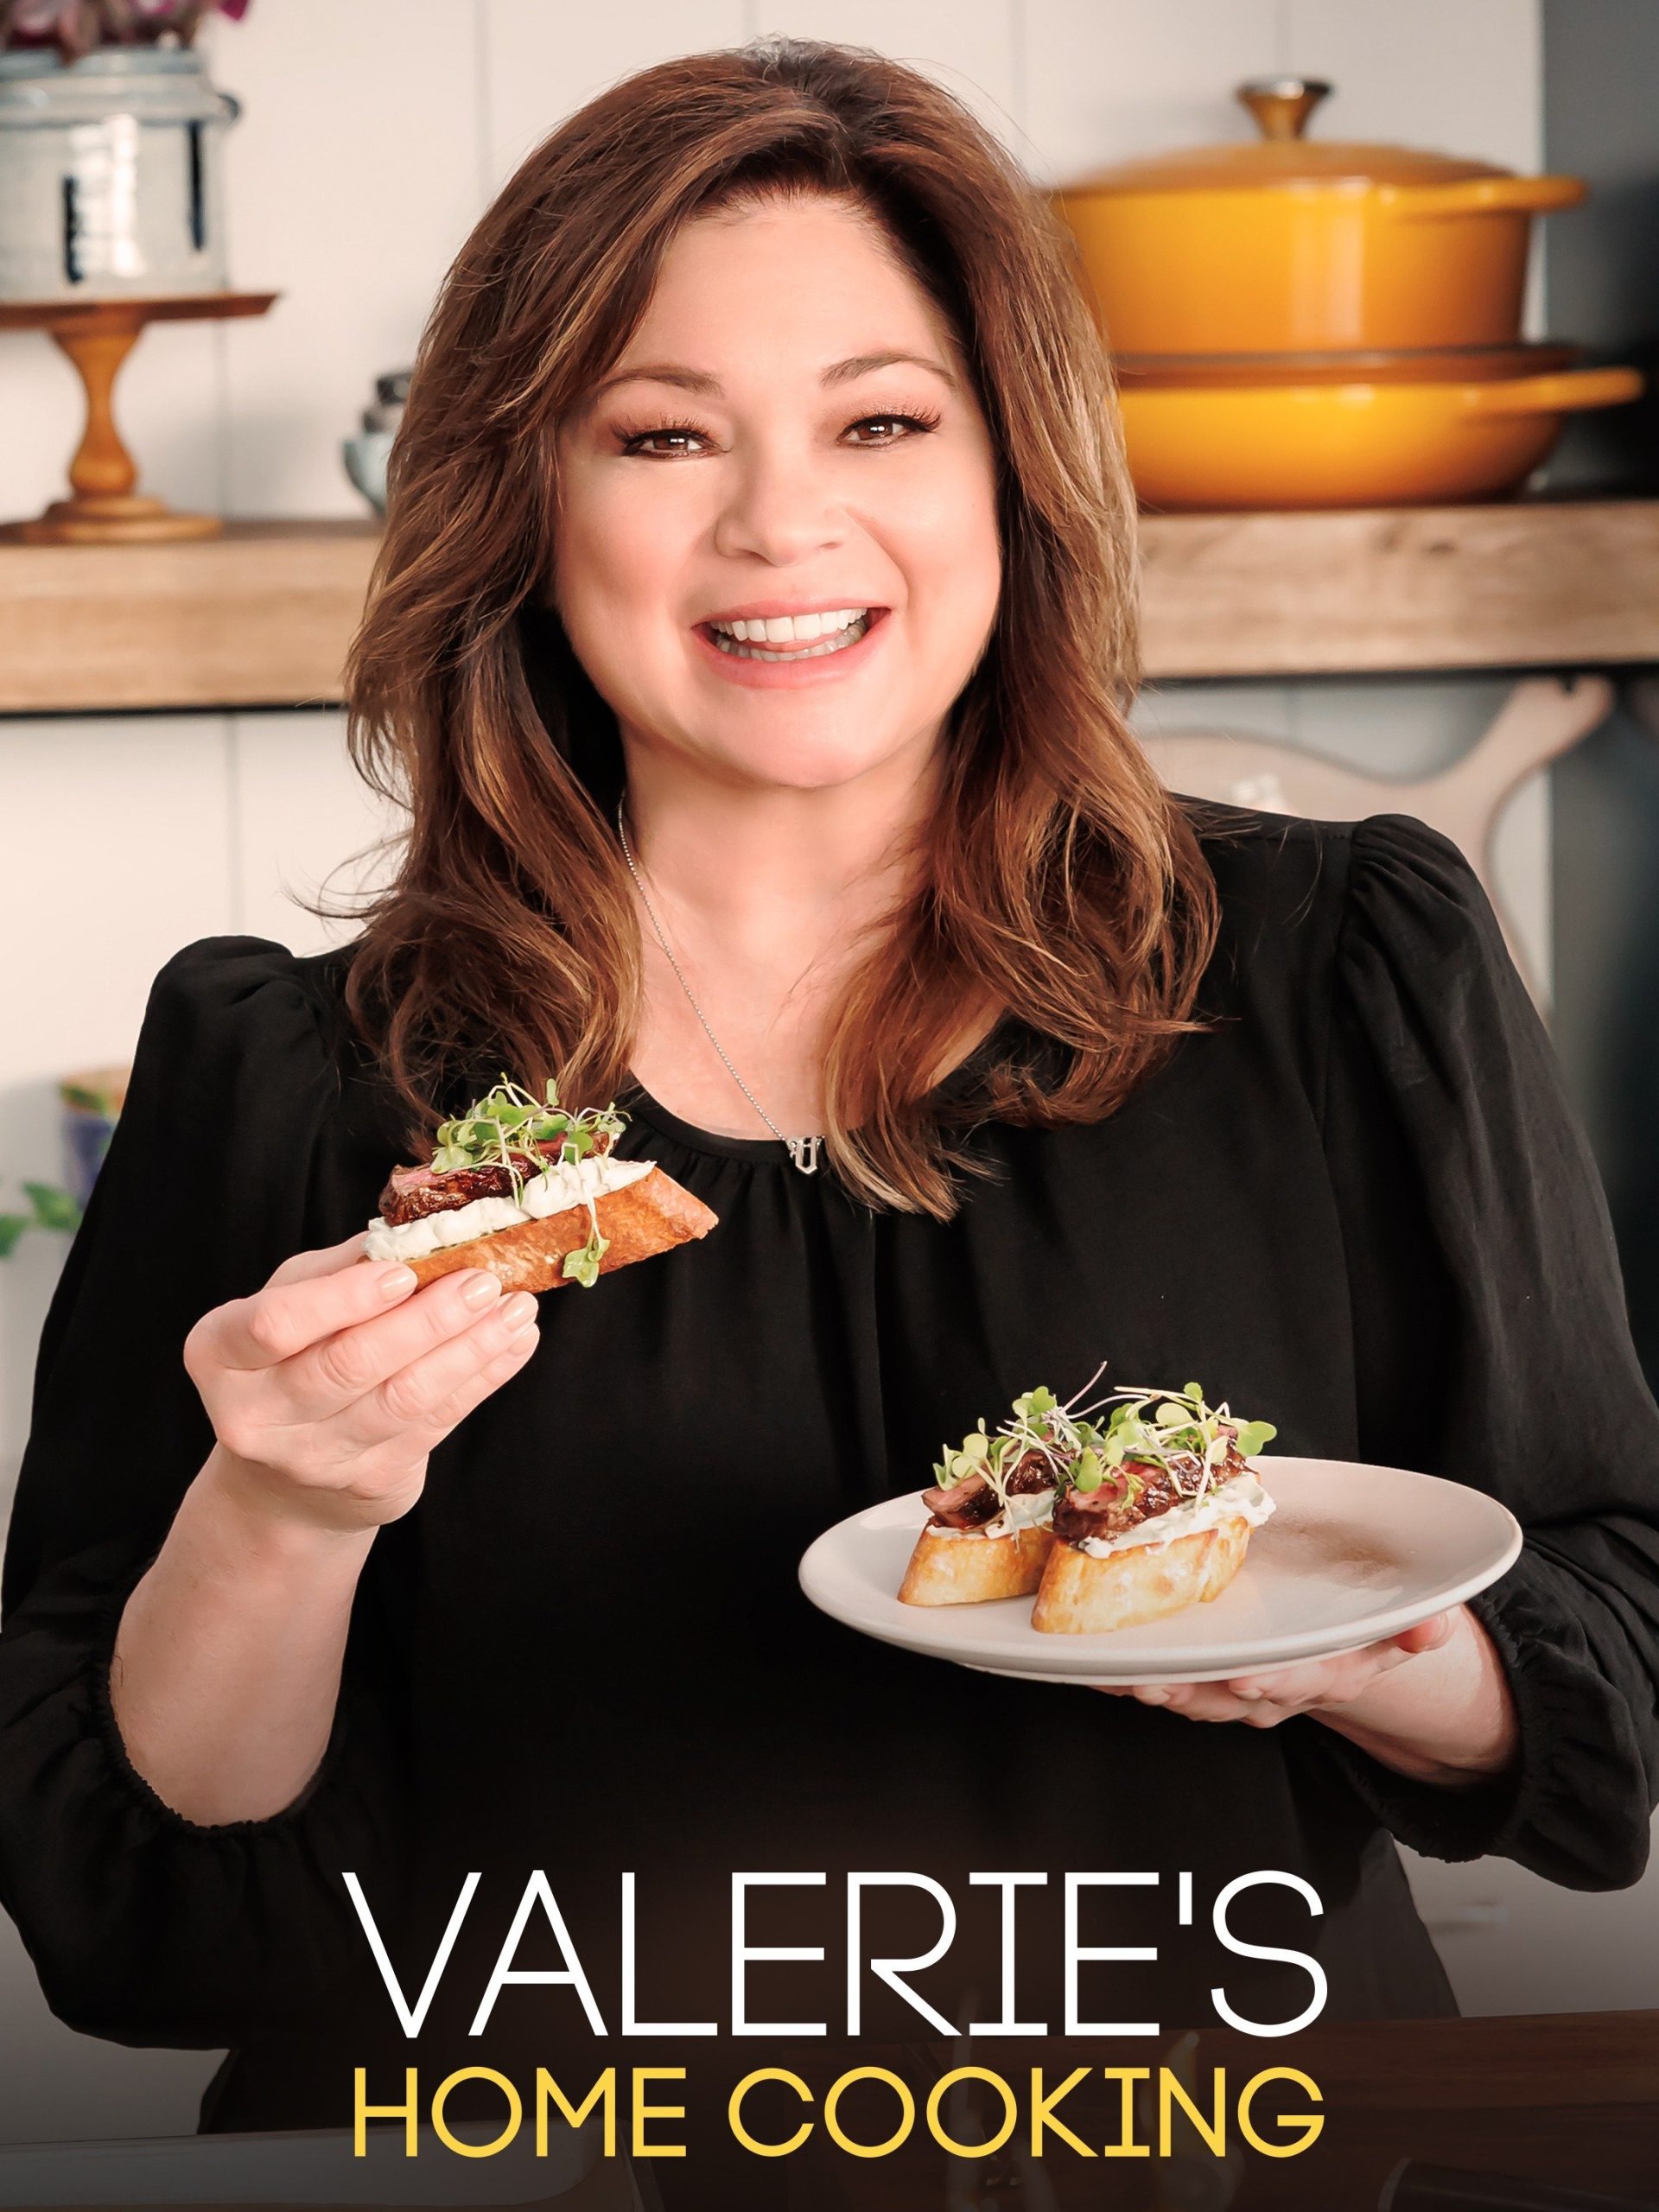 Valerie's Home Cooking "Recipe Roadmaps" S14E7 May 21 2023 on Food